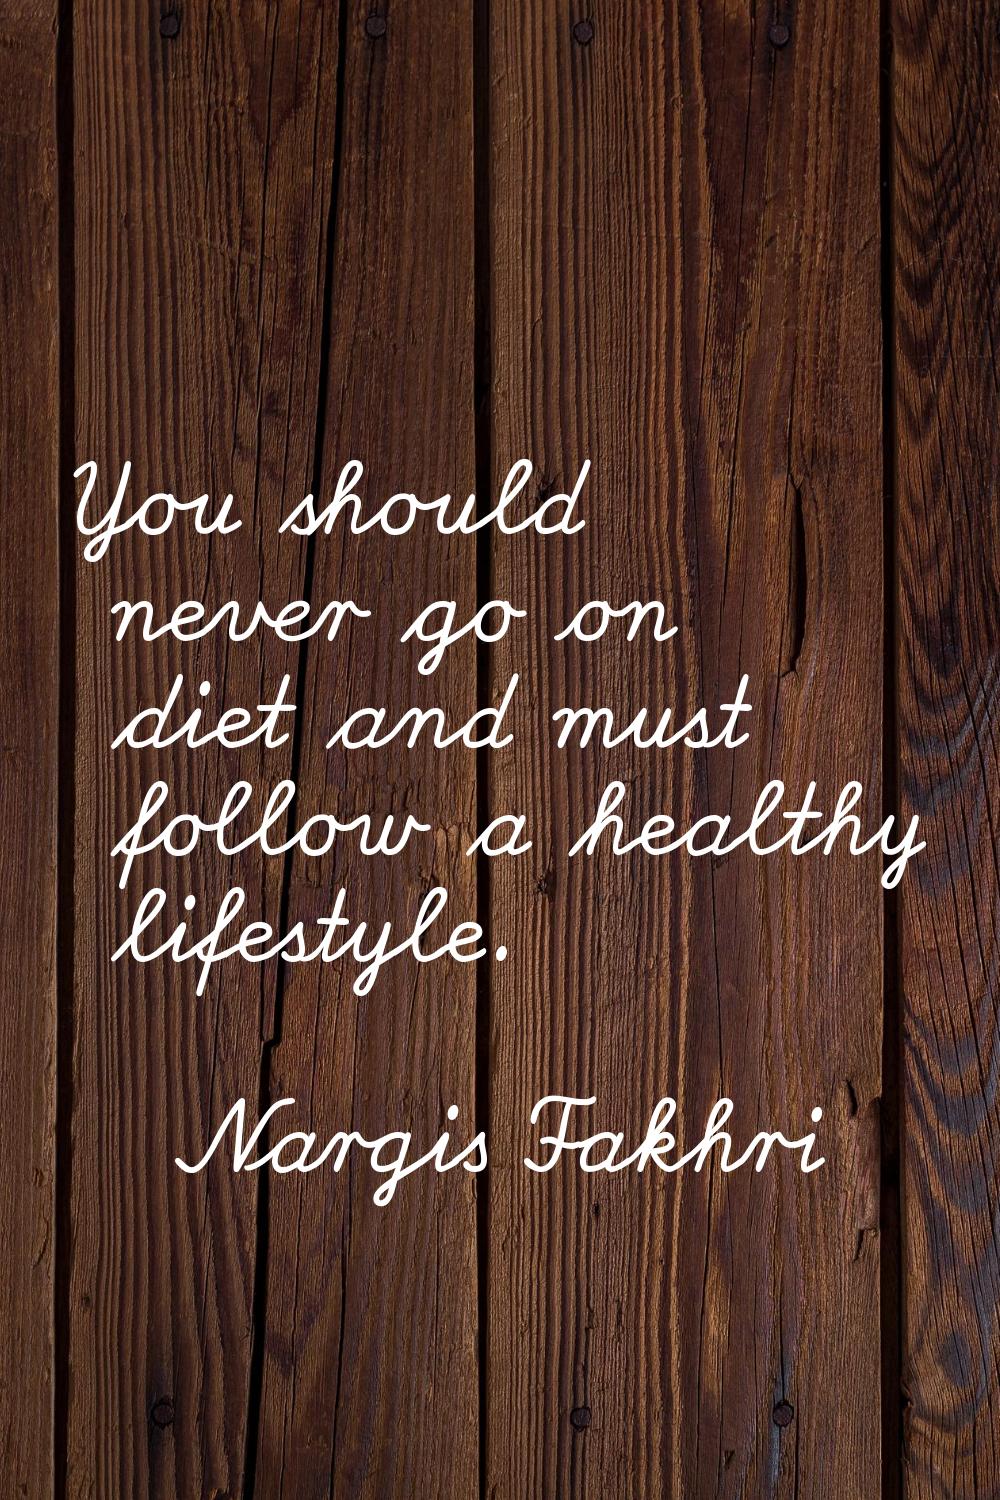 You should never go on diet and must follow a healthy lifestyle.